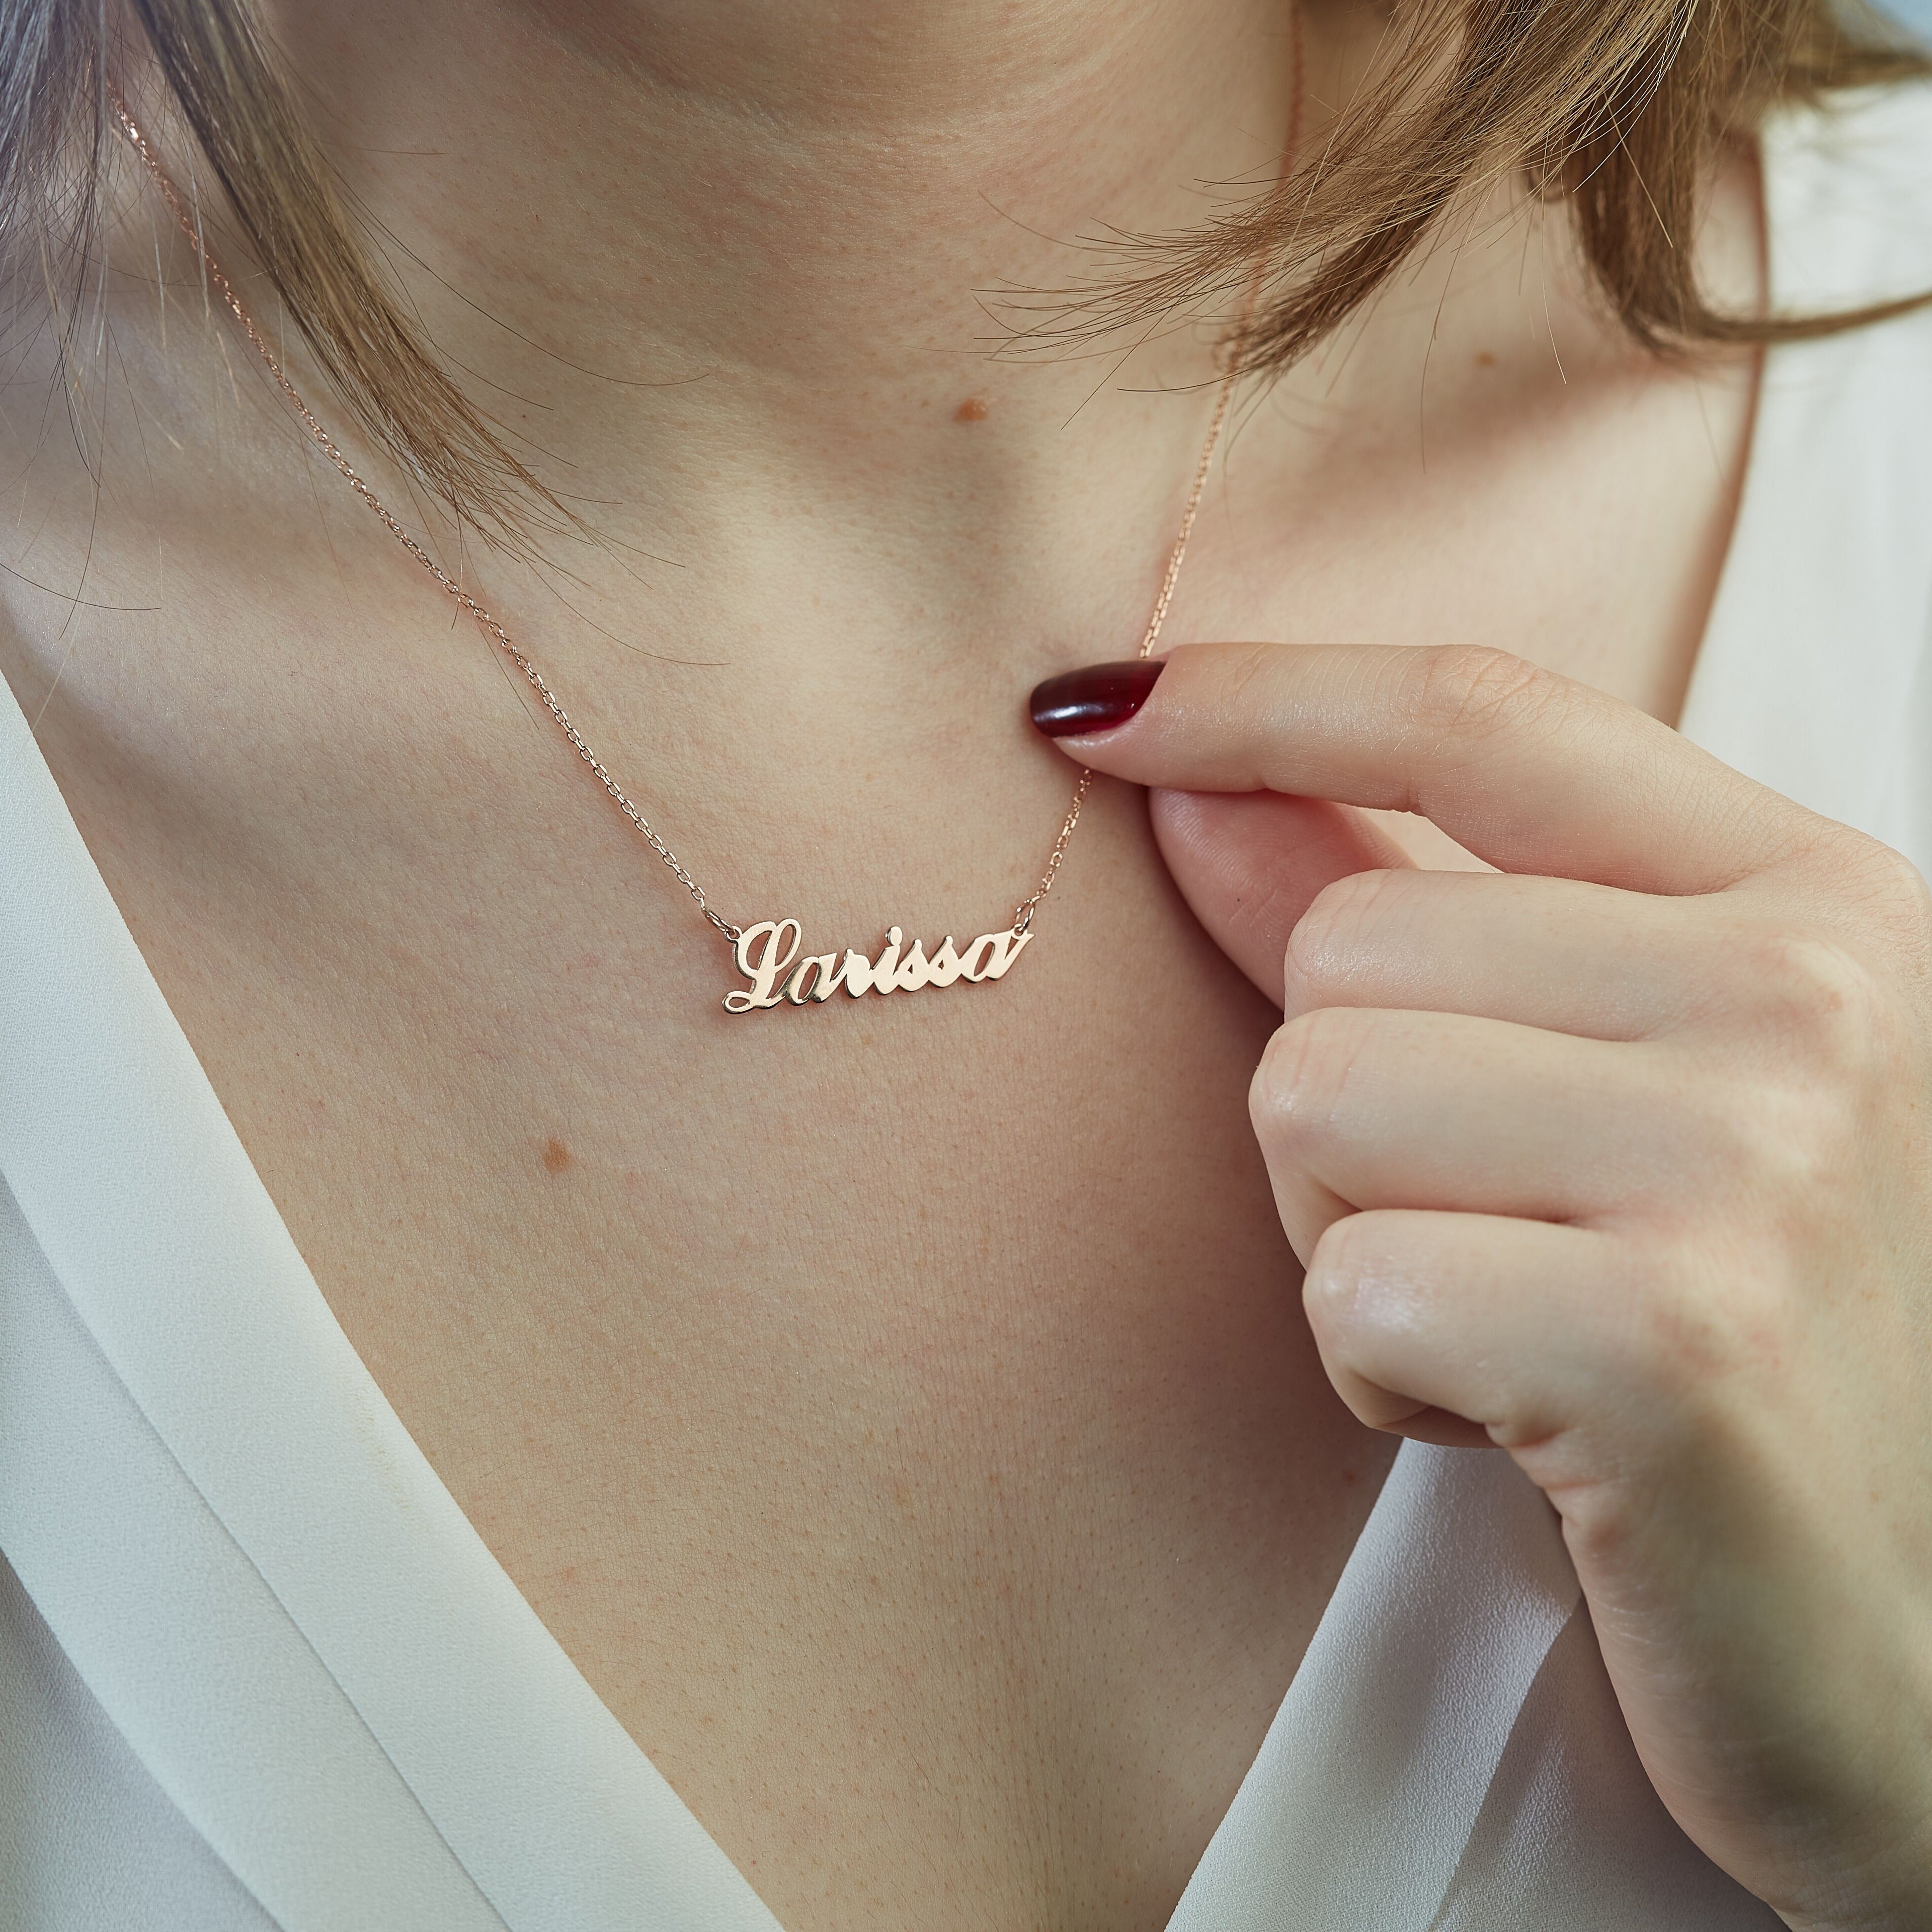 Lifestyle Image of Woman Wearing RoseGold-Plated Carrie Name Necklace from Magpie Gems